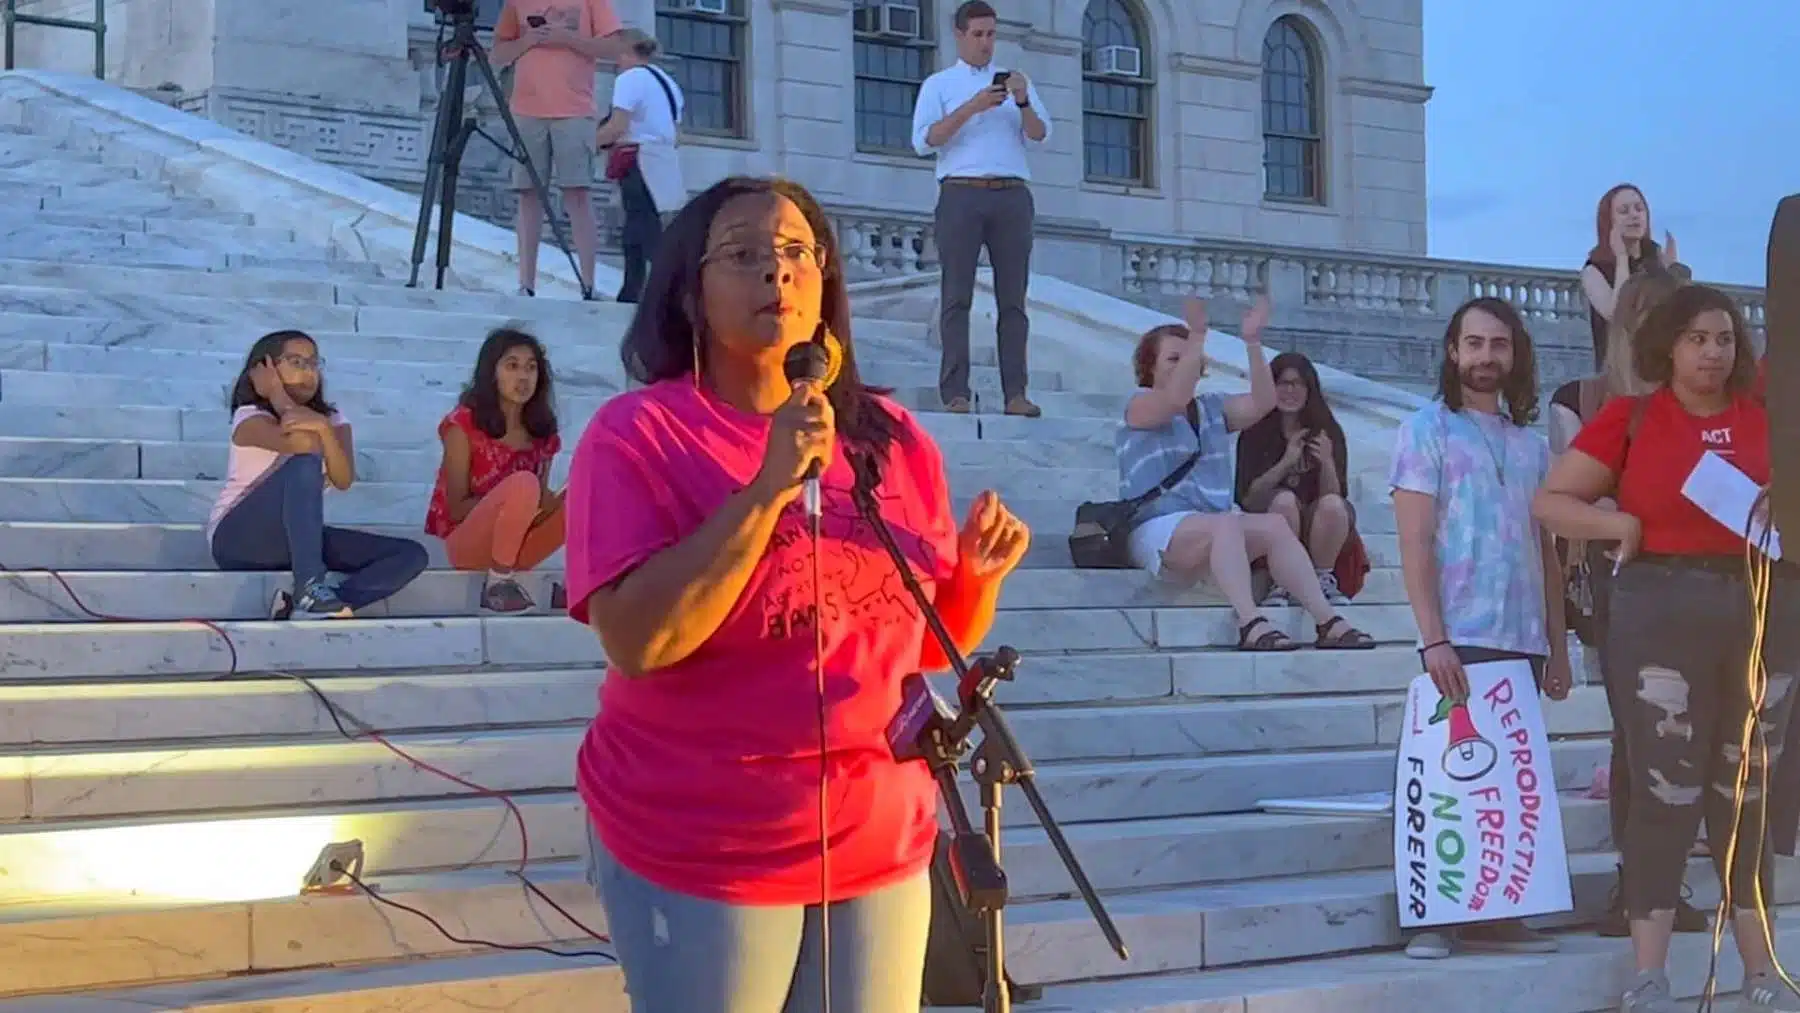 Rhode Island News: The Womxn Project responds to Friday night’s rally